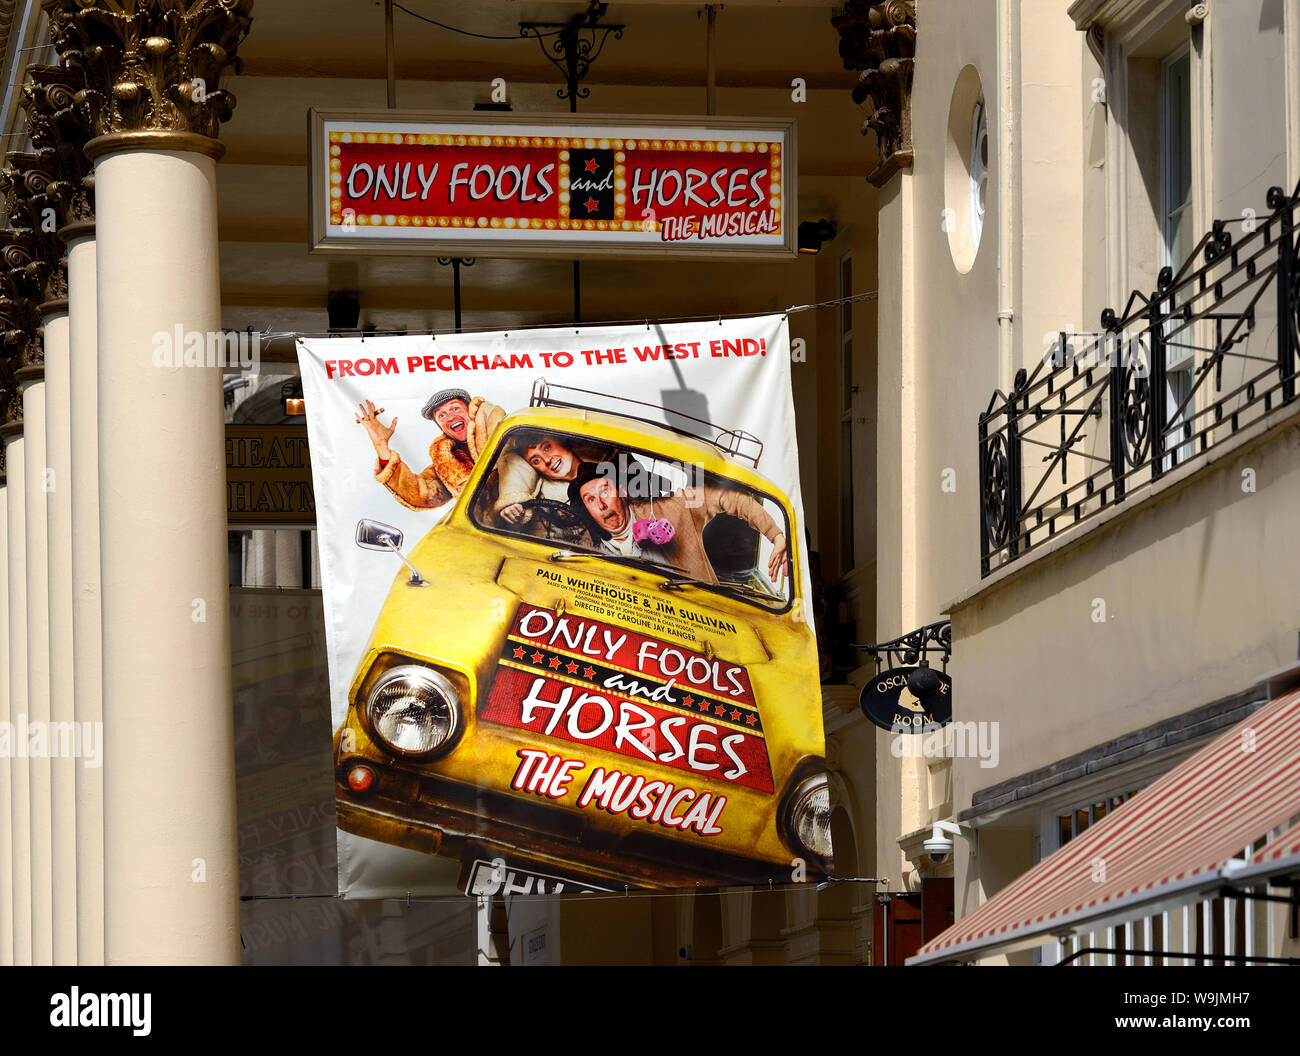 London, England, UK. 'Only Fools and Horses - The Musical' (by Paul Whitehouse and Jim Sullivan) at the Theatre Royal, Haymarket. (August 2019) Stock Photo